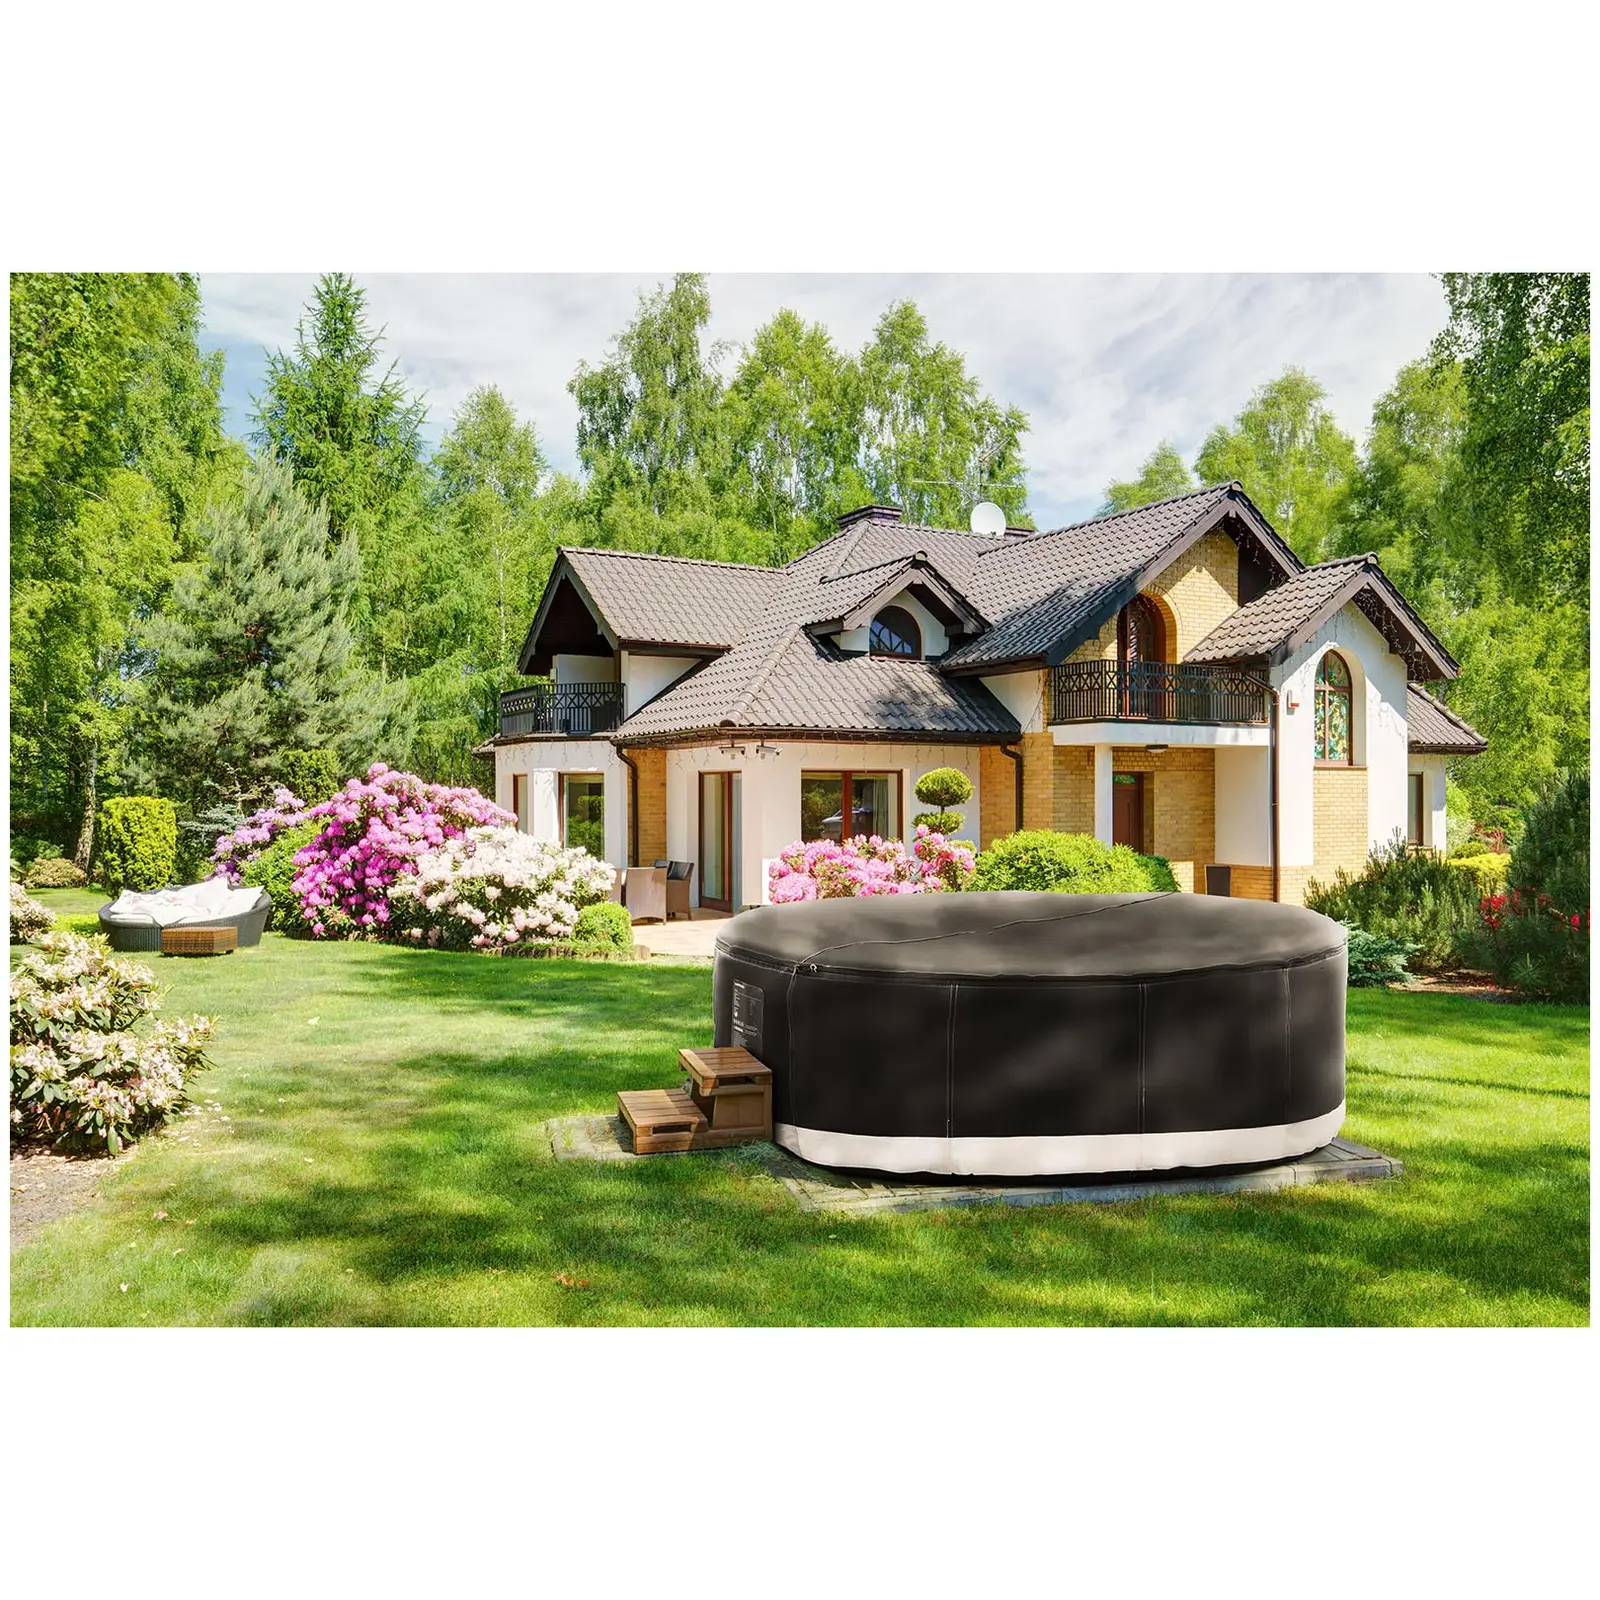 Inflatable Hot Tub - 1,000 L - 6 people - 130 nozzles - imitation leather